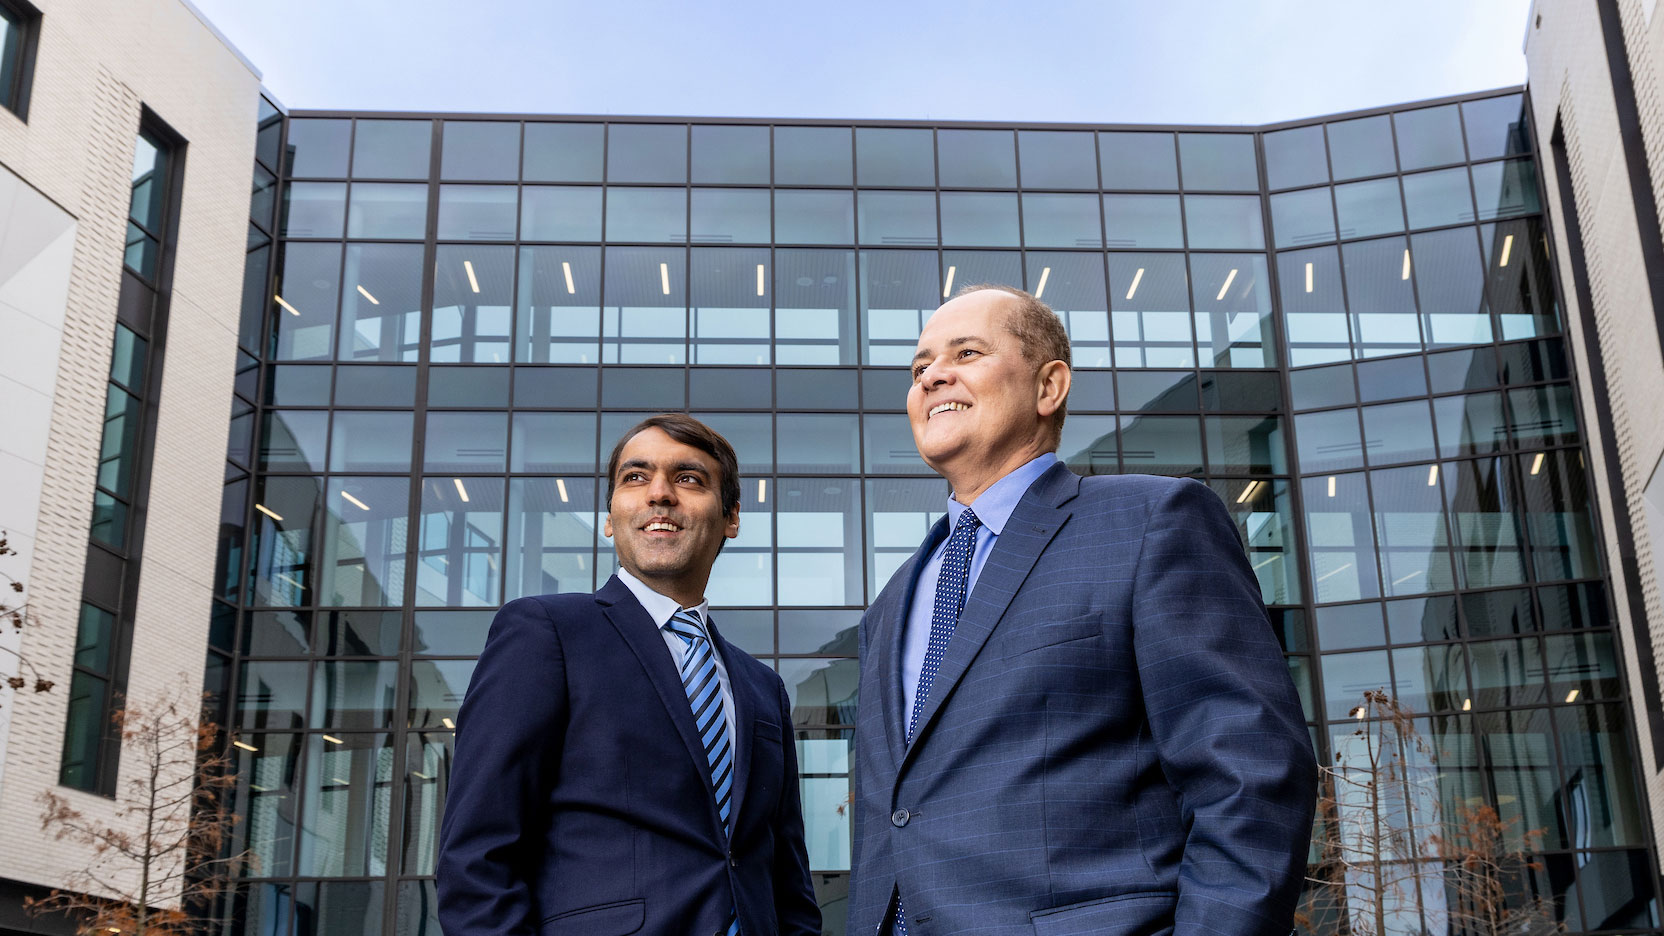 Forced perspective upward angle photo of Lokesh Shahani, MD, MPH, FACP and Jair Soares, MD, PhD with the John S. Dunn Behavioral Sciences Center in the background